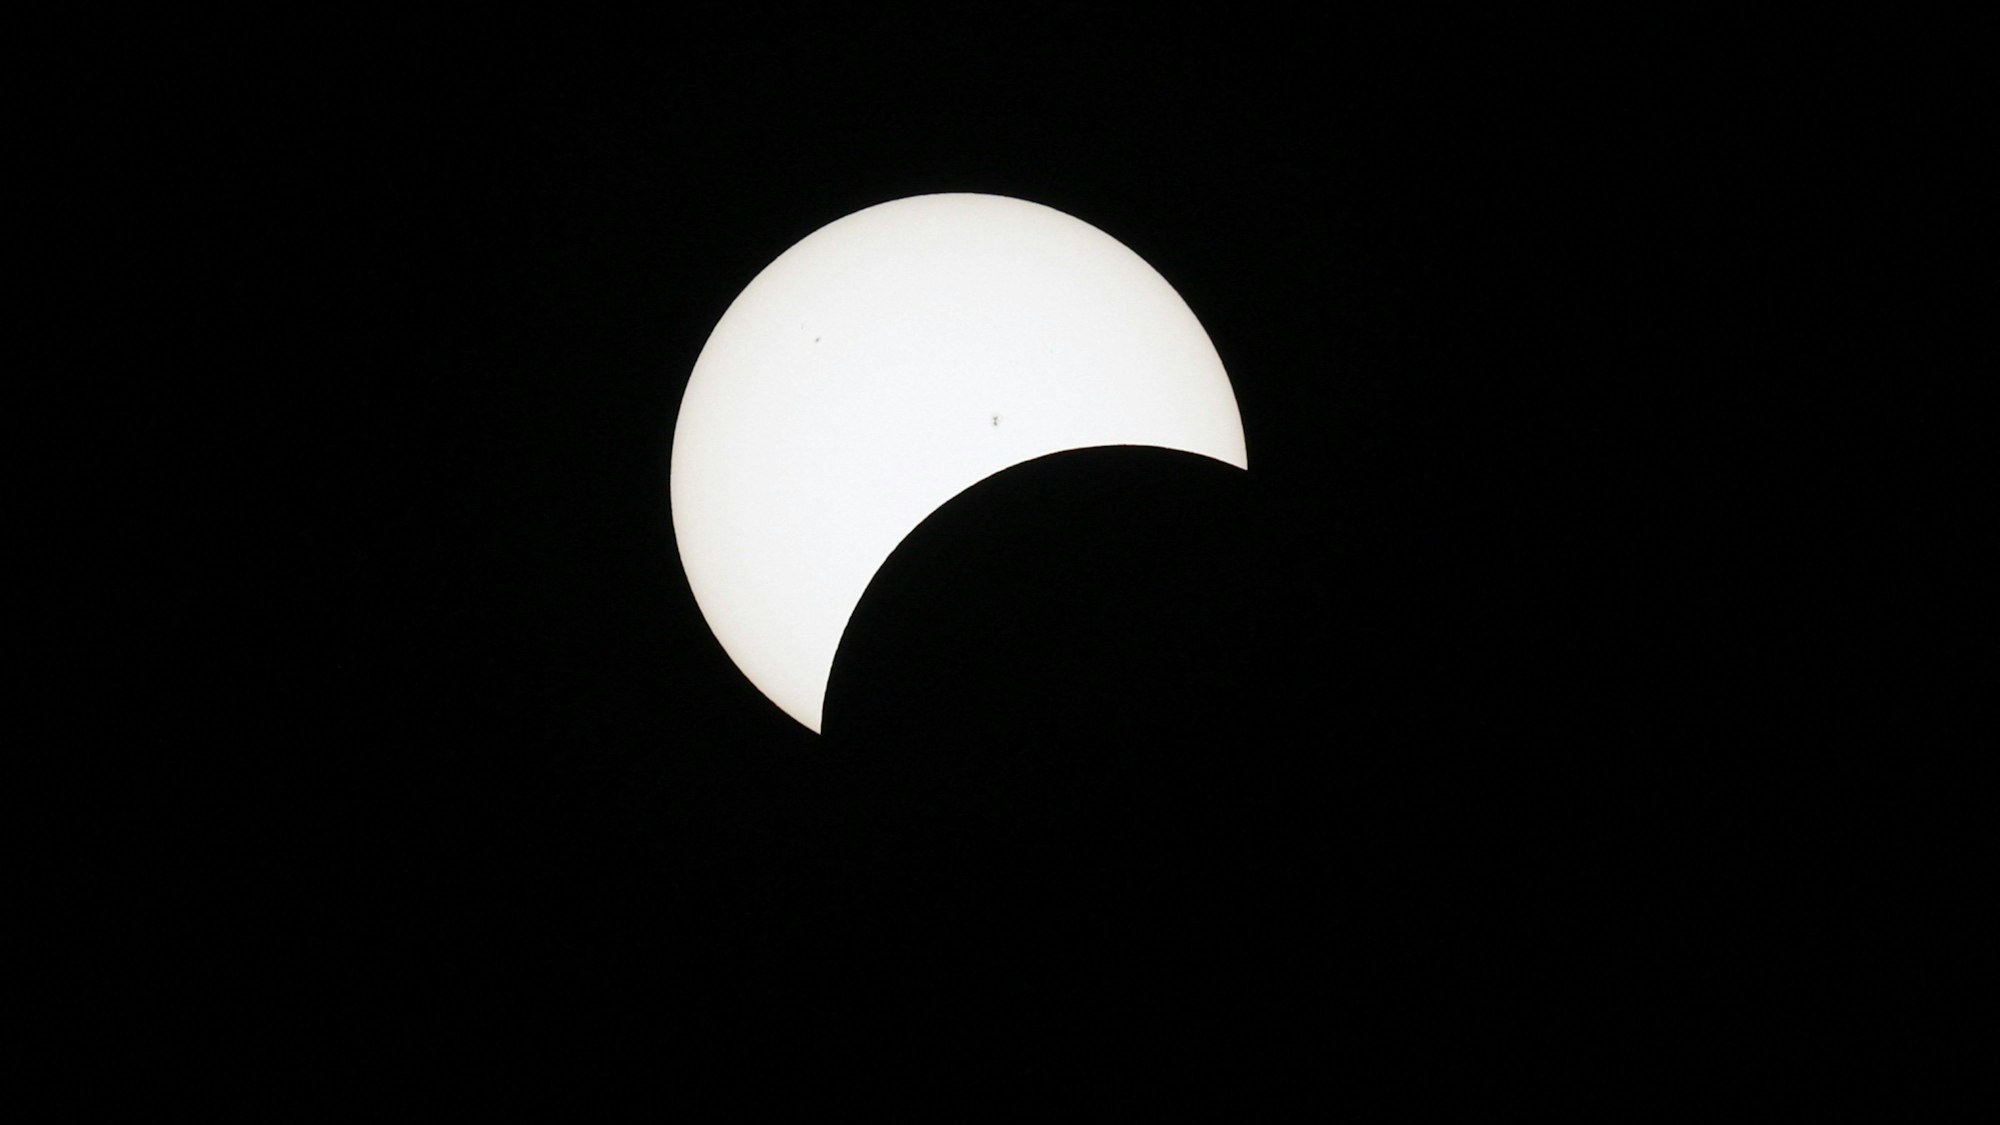 HOULTON, MAINE - APRIL 08: The moon crosses the sun during the eclipse on April 08, 2024 in Houlton, Maine. Millions of people have flocked to areas across North America that are in the "path of totality" in order to experience a total solar eclipse. During the event, the moon will pass in between the sun and the Earth, appearing to block the sun.   Joe Raedle/Getty Images/AFP (Photo by JOE RAEDLE / GETTY IMAGES NORTH AMERICA / Getty Images via AFP)